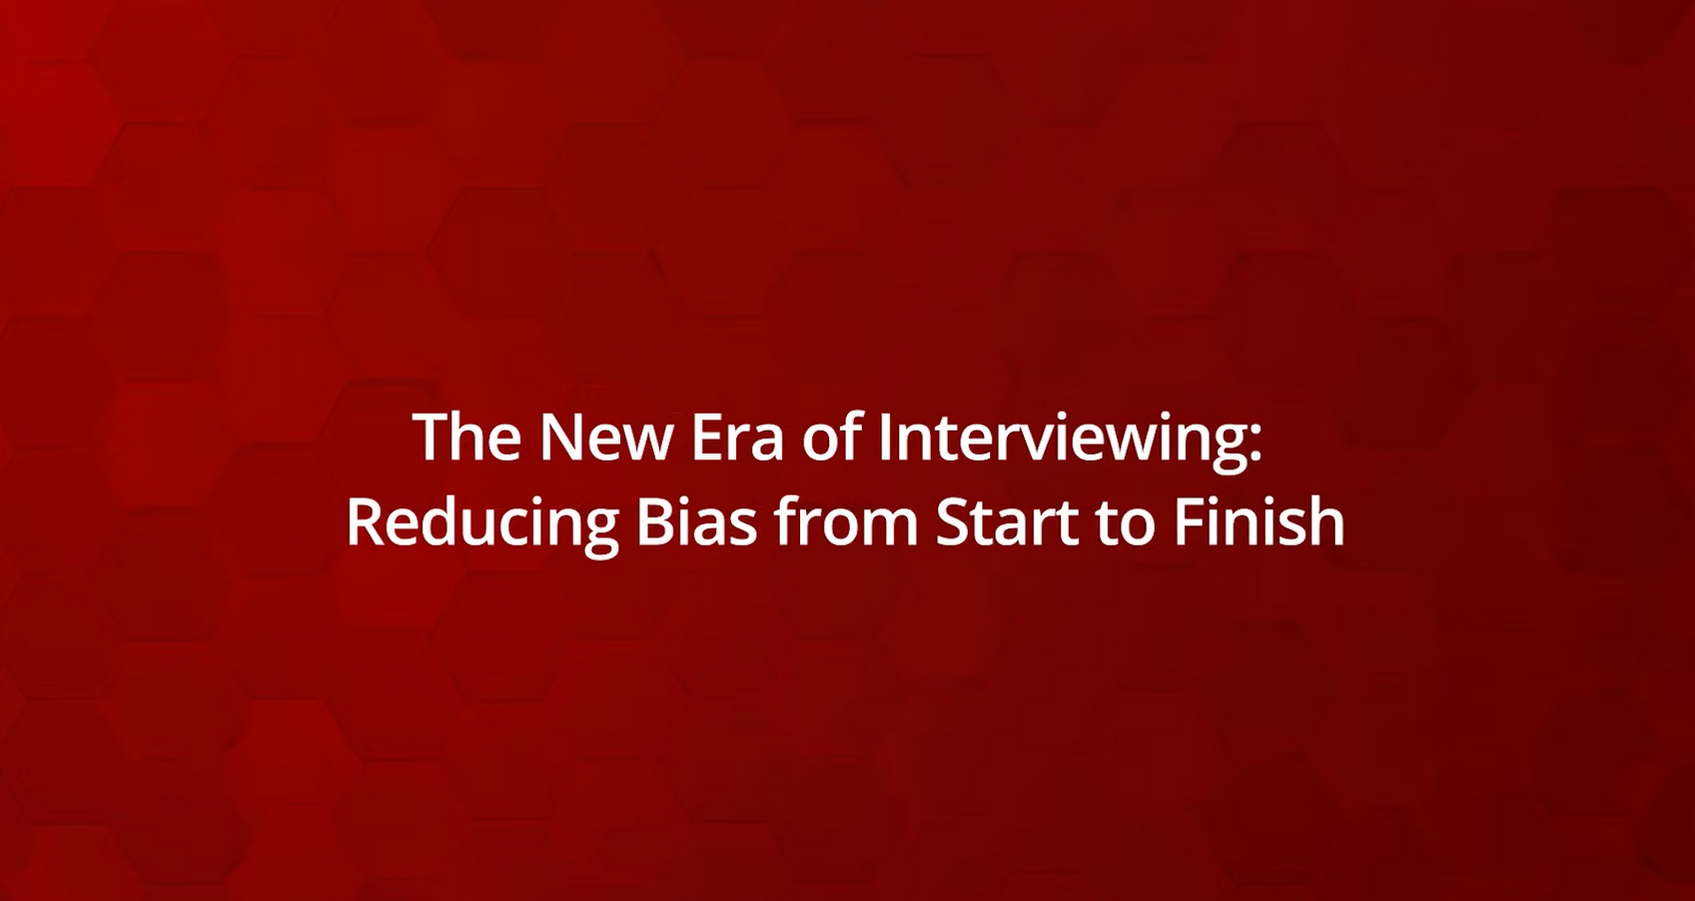 The New Era of Interviewing: Reducing Bias from Start to Finish